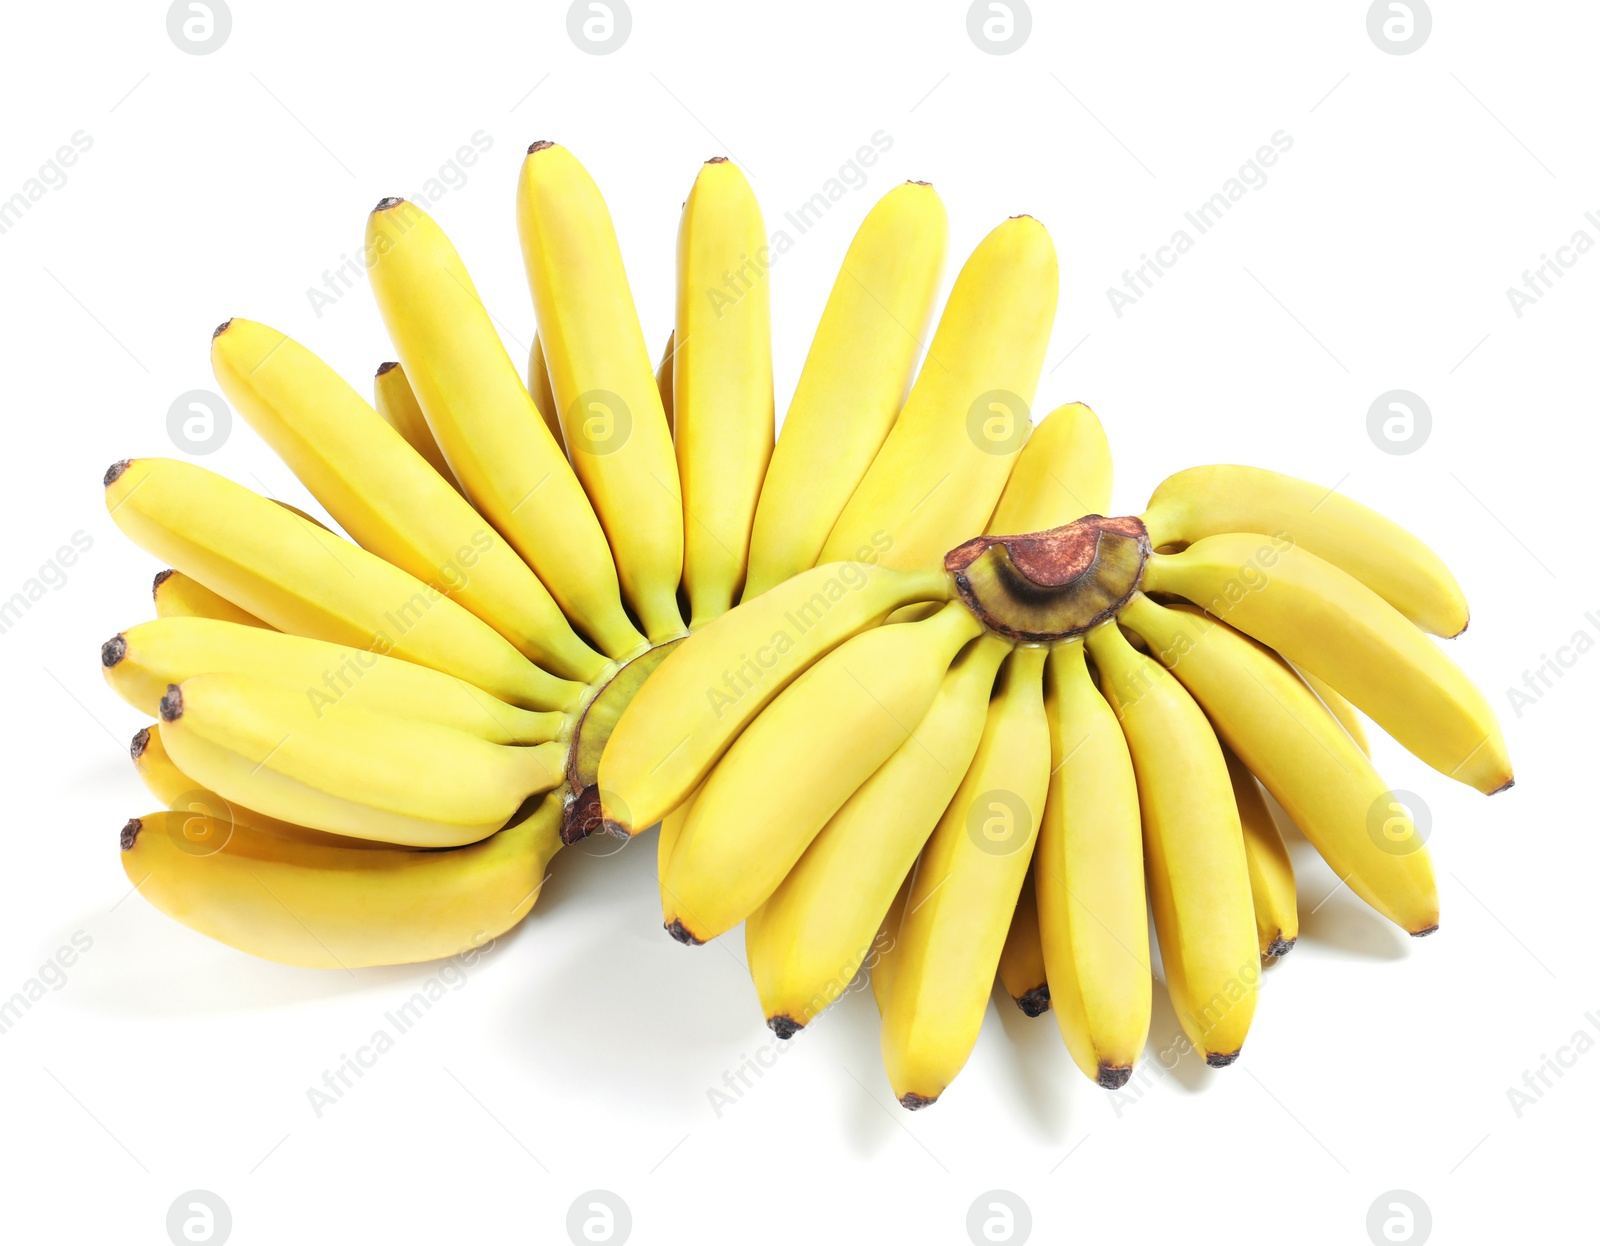 Photo of Bunches of ripe baby bananas on white background